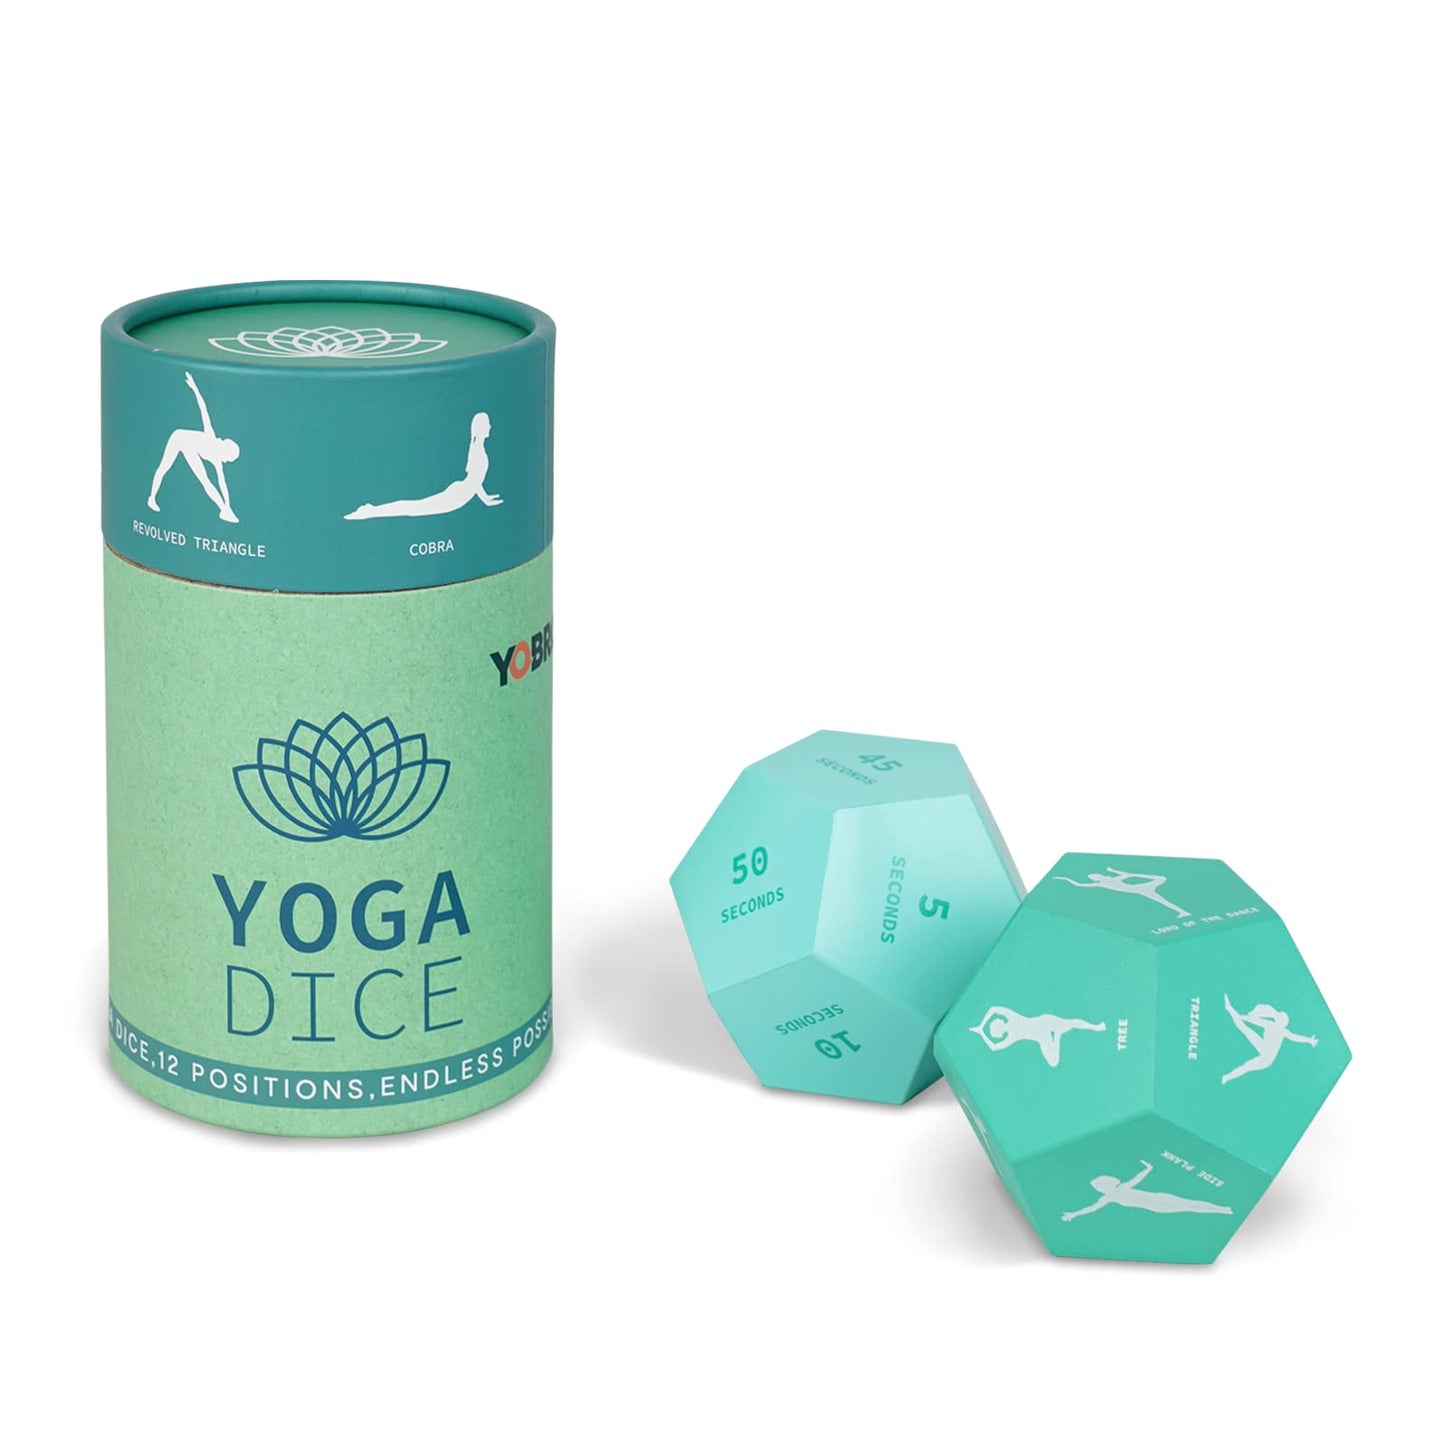 YOBRO Yoga Dice Game for Adults and Kids, Mindfulness Dice Kit, Exercise & Fitness Accessories for Women, PE Equipment Accessories for Home Workout, Yoga Meditation Gifts for Women&Men&Yogis, 2-Pack